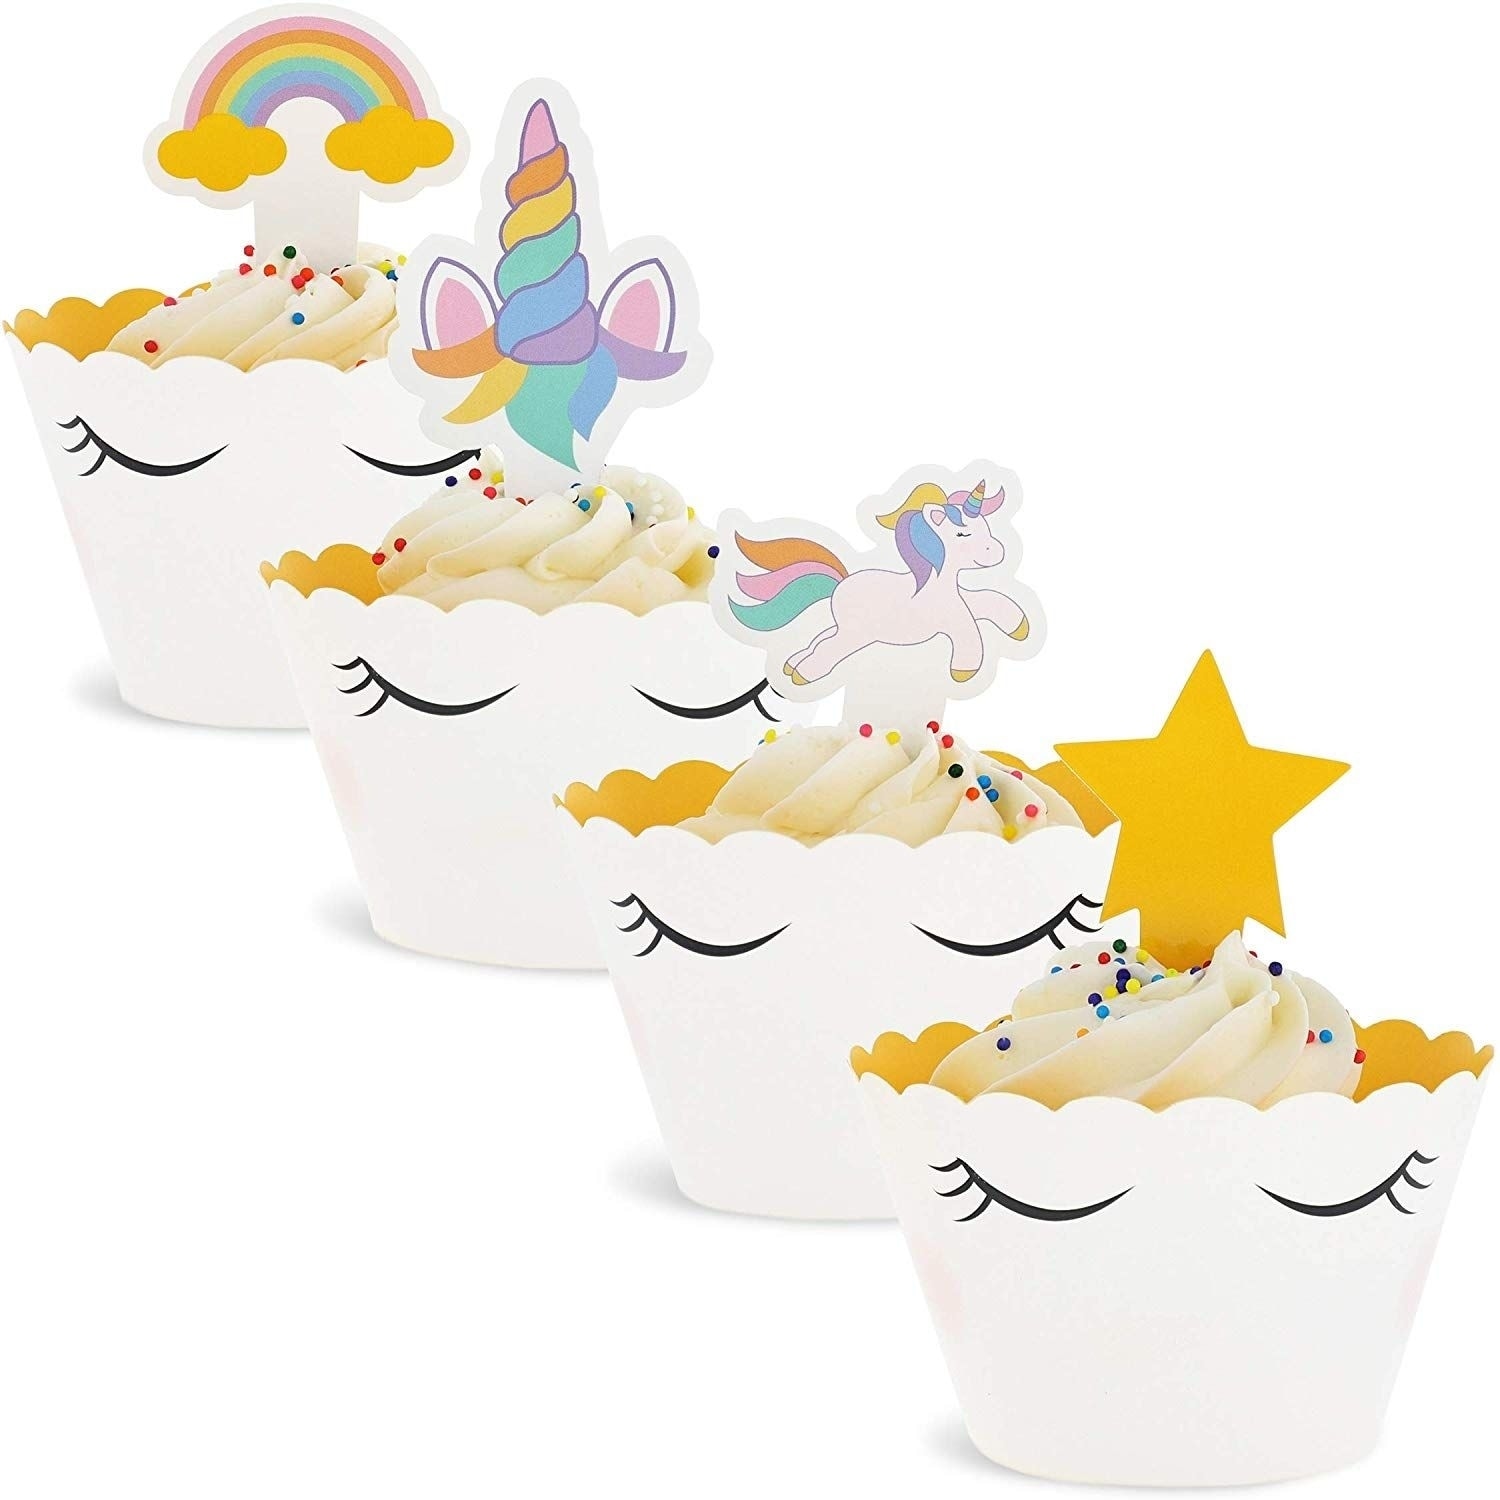 https://ak1.ostkcdn.com/images/products/29115305/Juvale-100-Pack-Rainbow-Unicorn-Cupcake-Toppers-and-Wrappers-Party-Decorations-9f1f923c-8035-43b9-a6a4-e41c5d4a7042.jpg